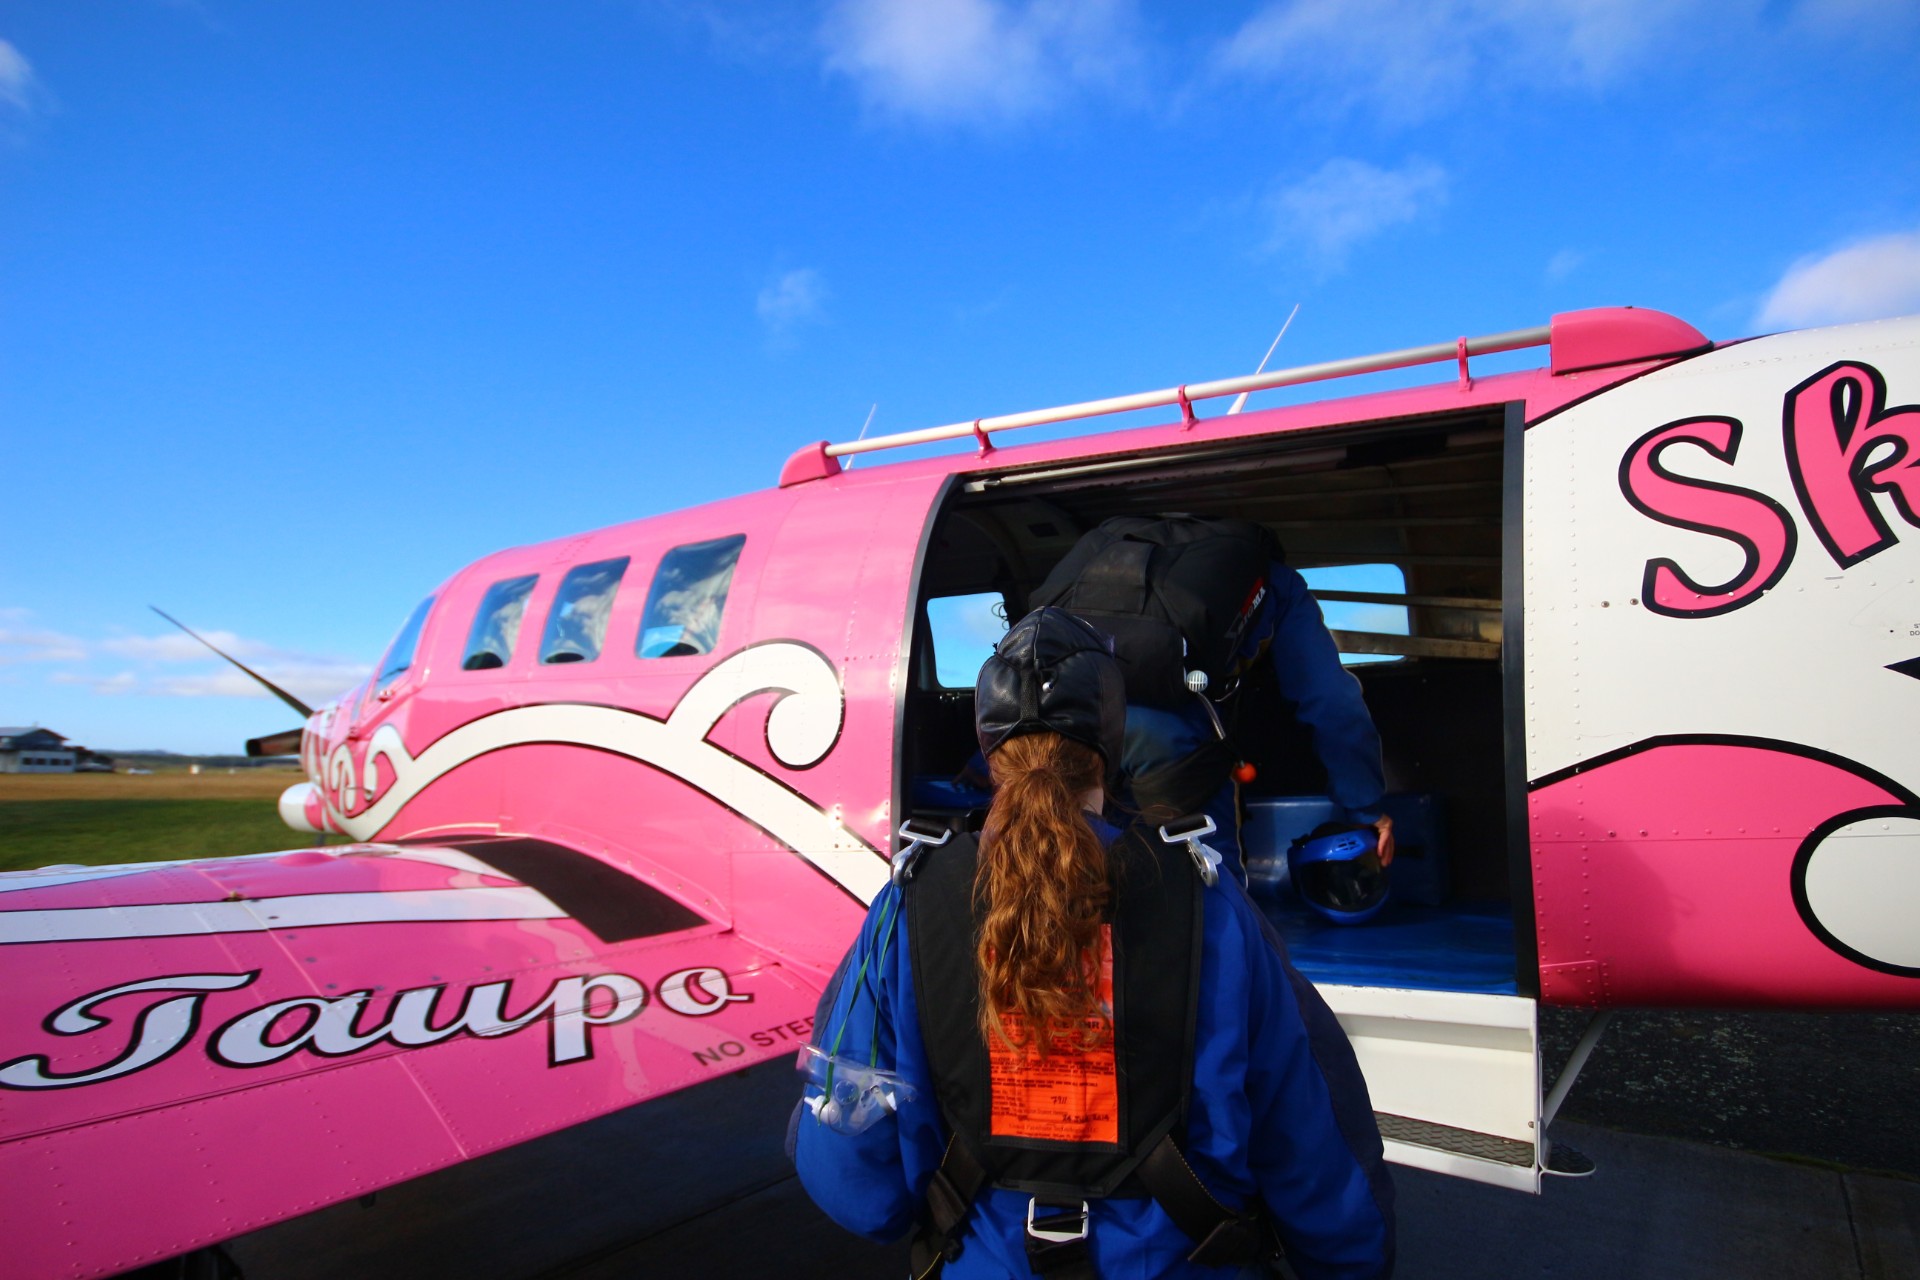 Pink airplane pink plane blue skies curly hair Skydive Taupo The Best Skydiving in New Zealand